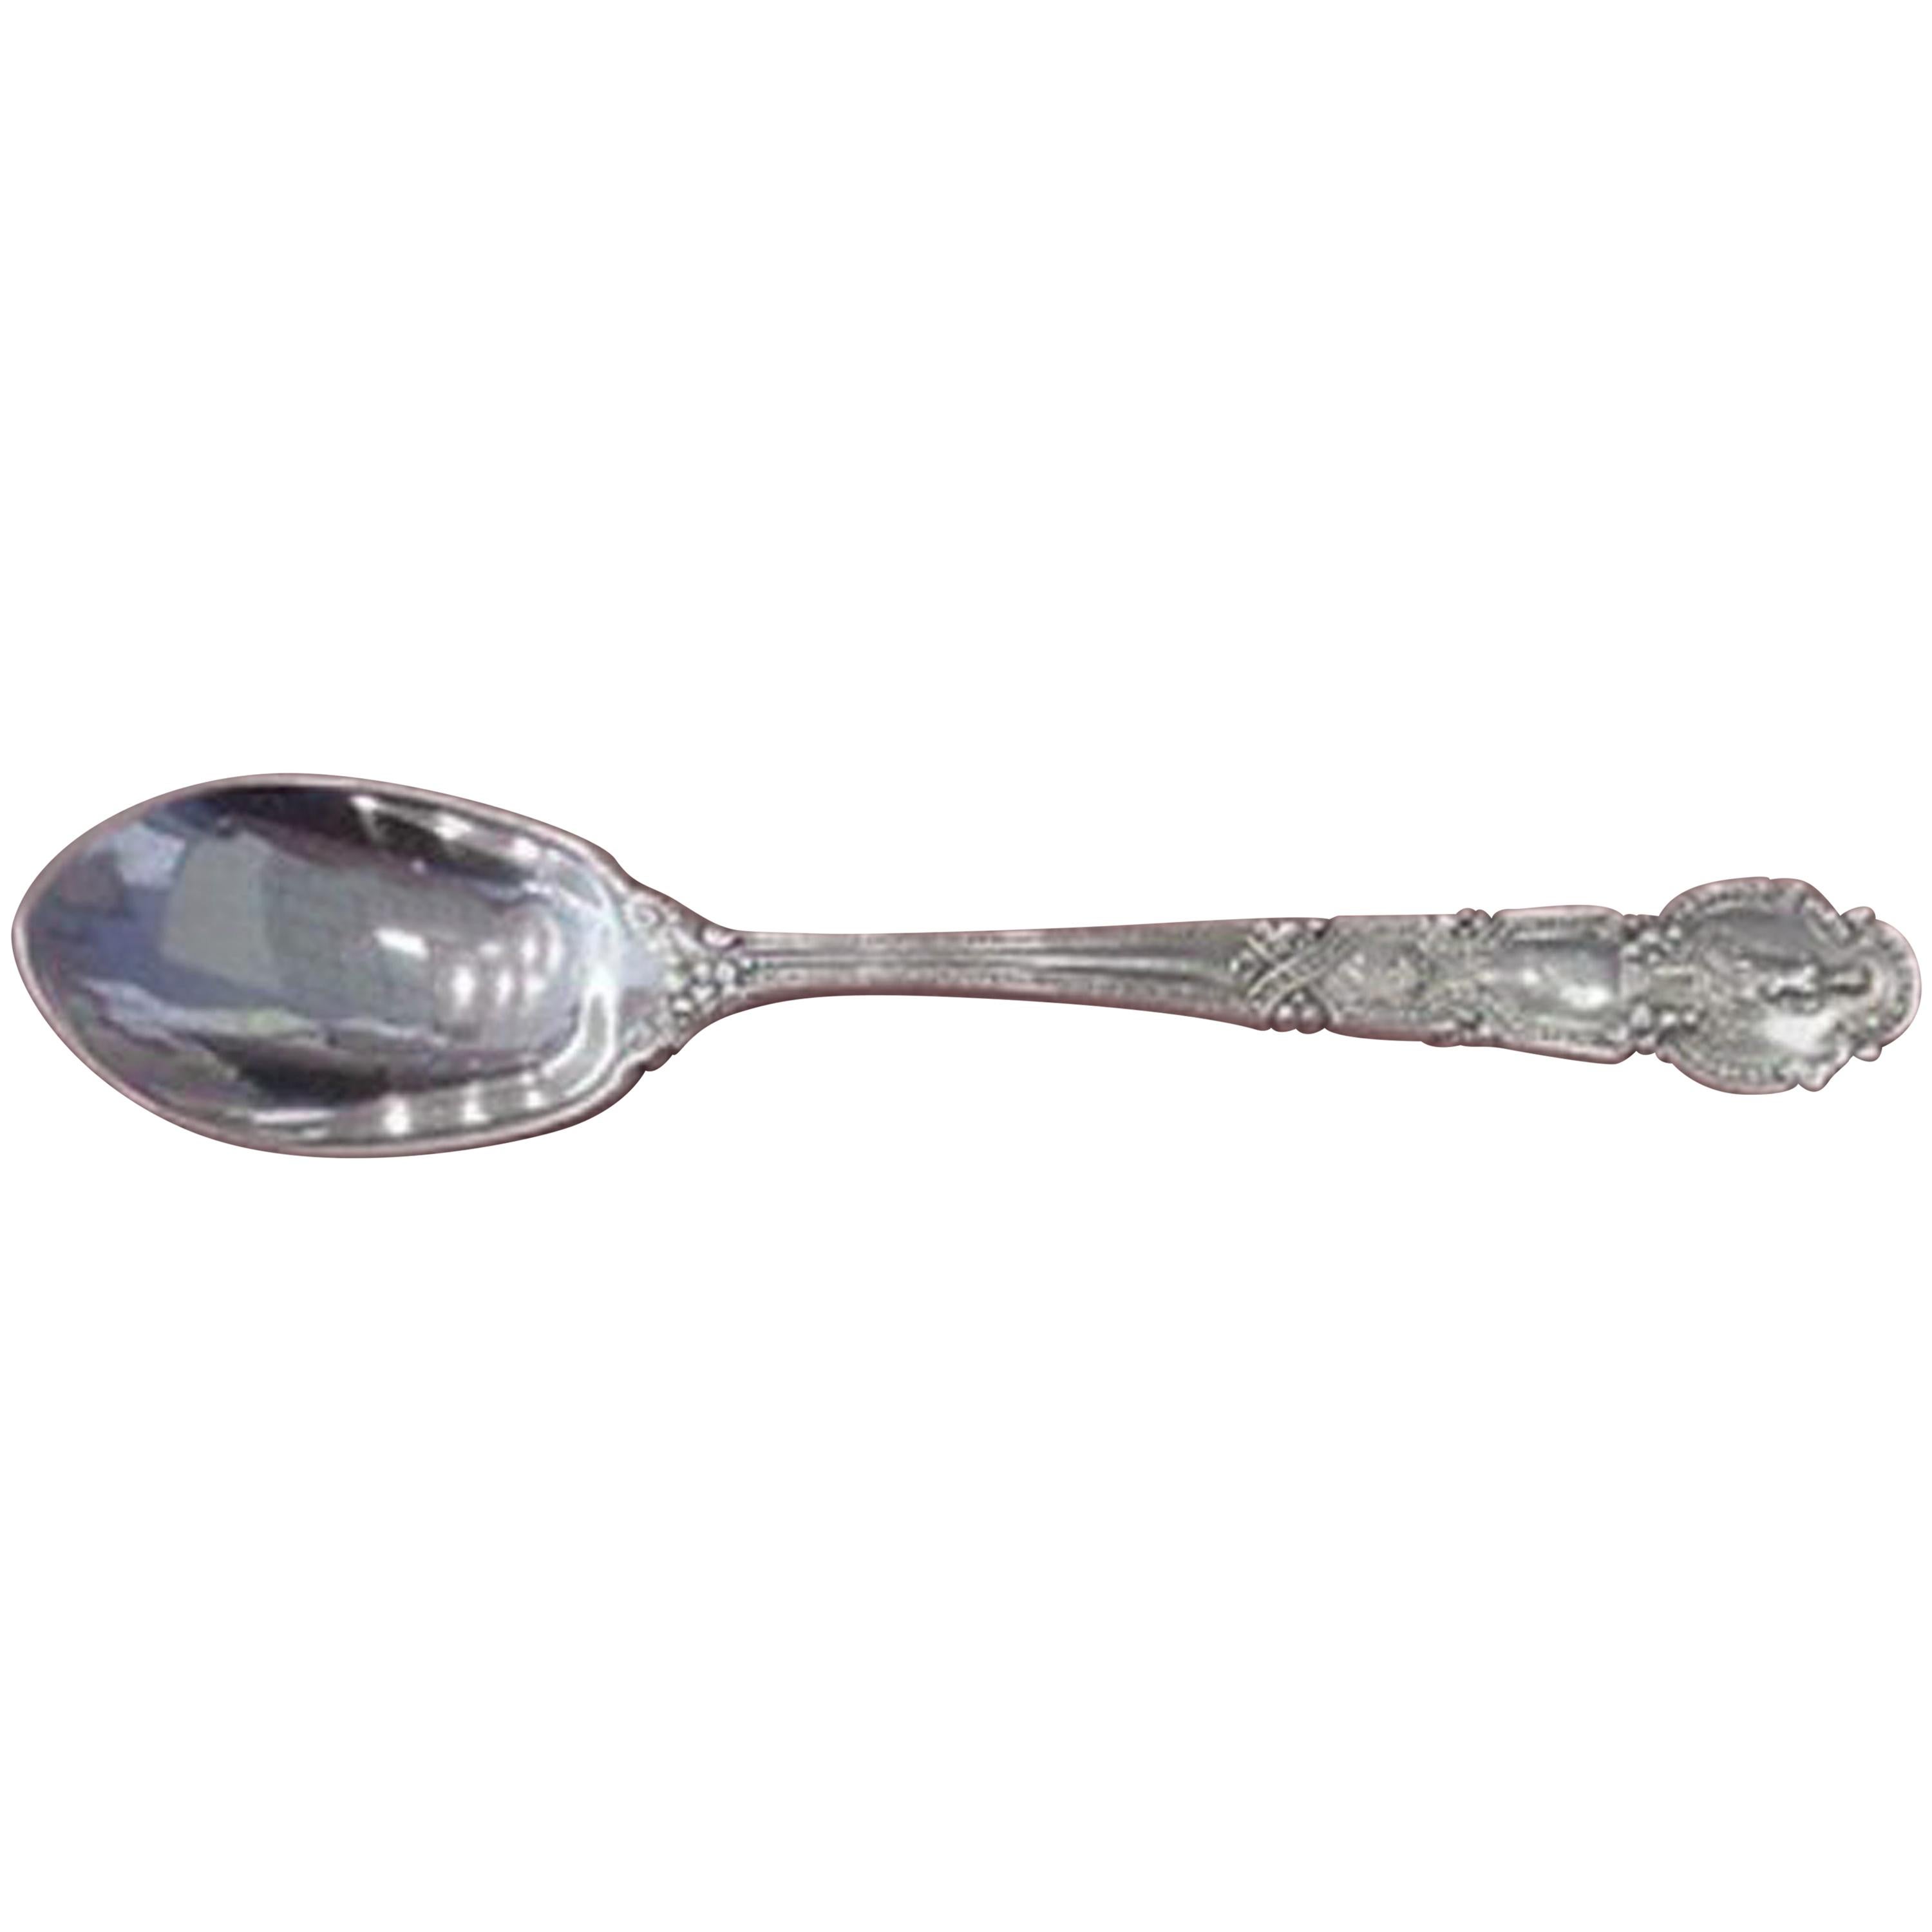 Renaissance by Tiffany & Co. Sterling Silver Ice Cream Spoon Figural 5 3/4"